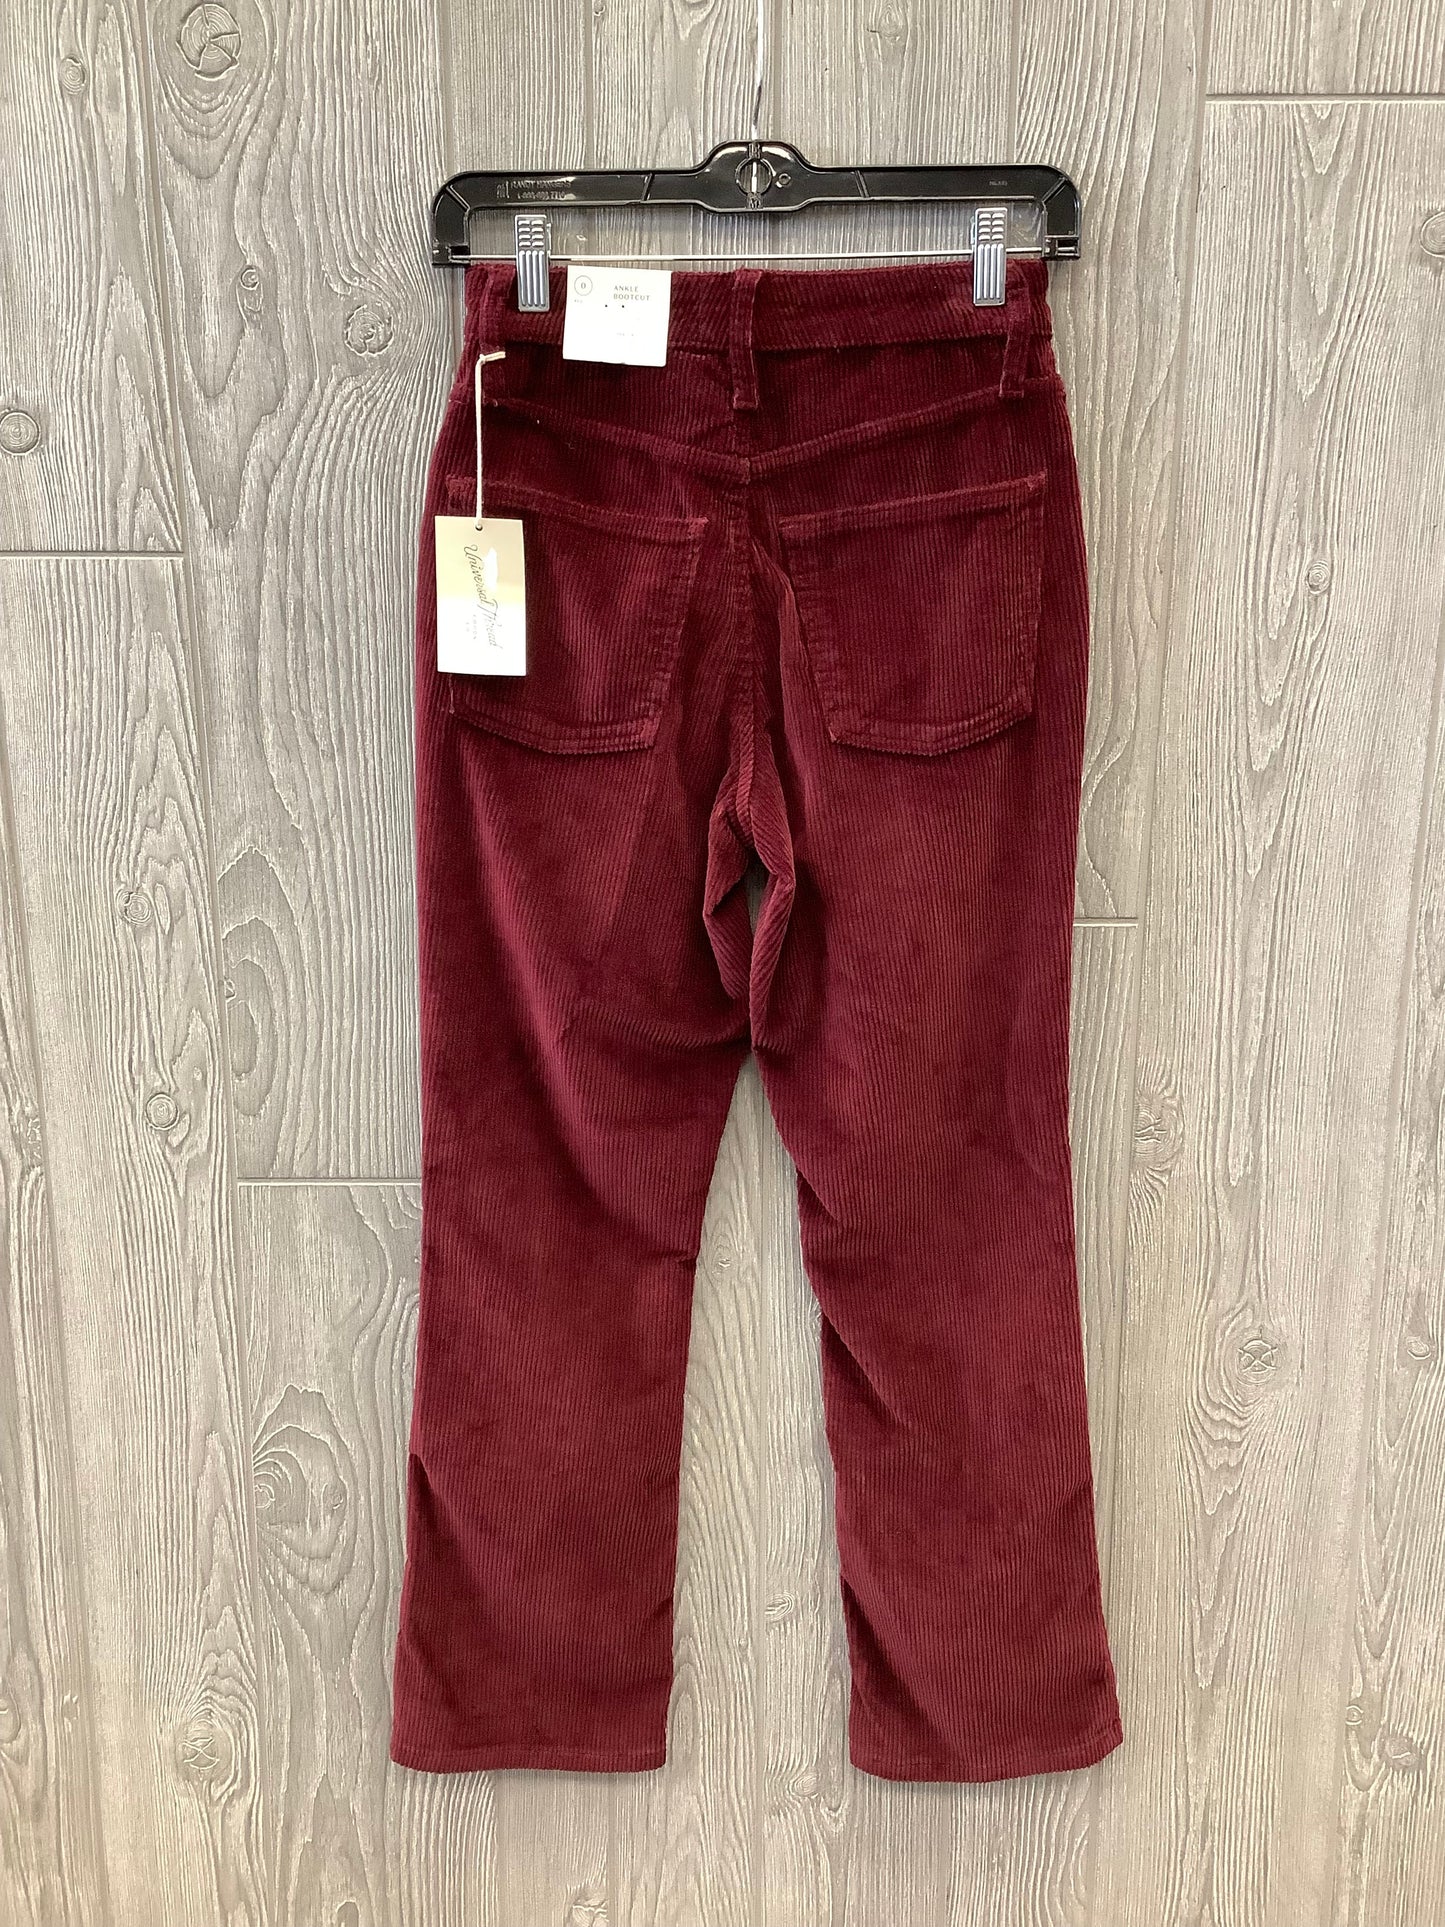 Pants Corduroy By Universal Thread  Size: 0